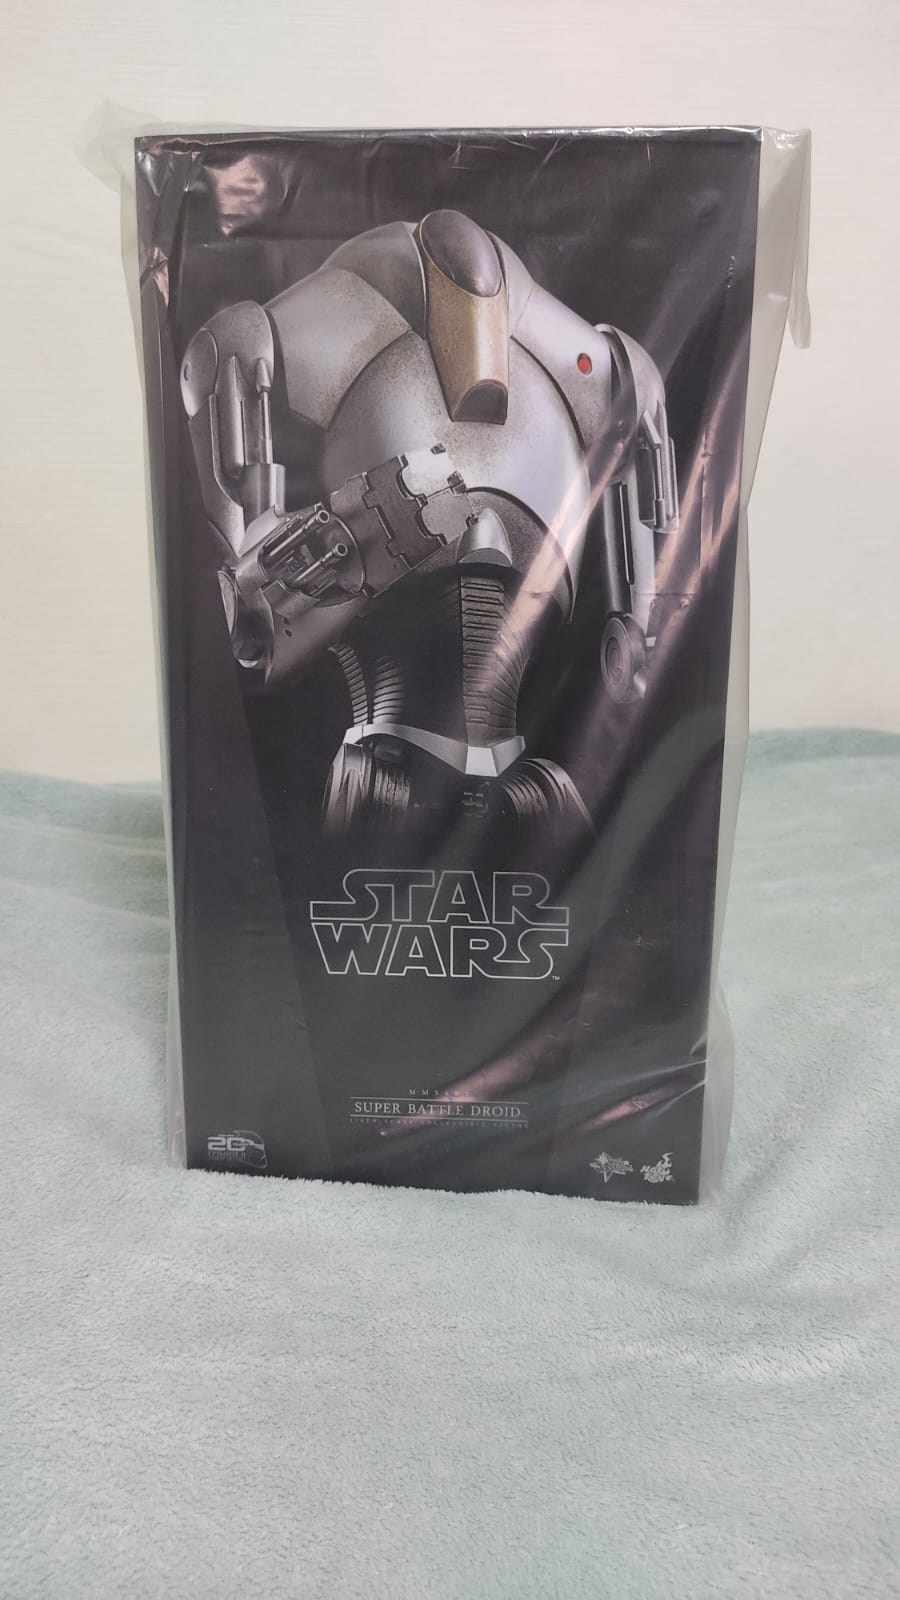 StarWars - NEW PRODUCT: HOT TOYS: STAR WARS EPISODE II: ATTACK OF THE CLONES™ SUPER BATTLE DROID™ 1/6TH SCALE COLLECTIBLE FIGURE Whats156